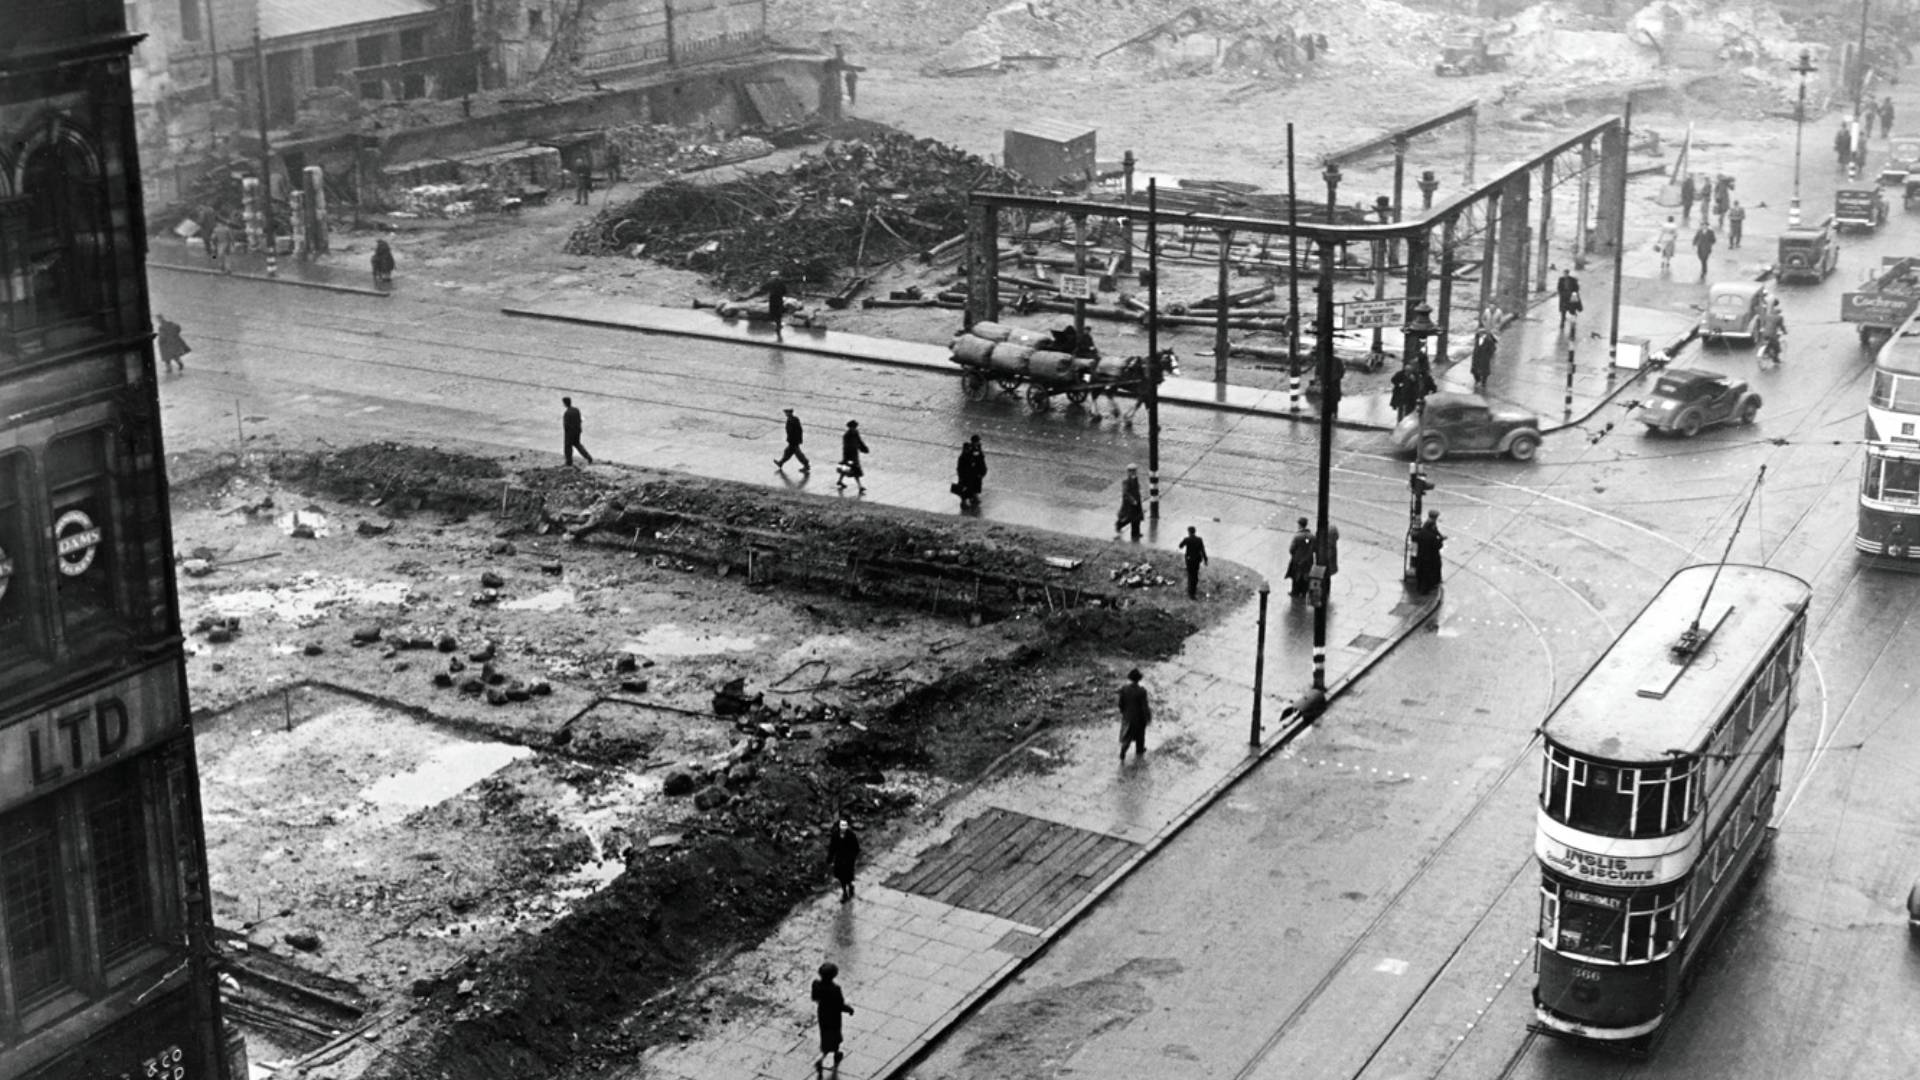 Rubble strewn plots, frames of buildings, and large cleared areas remain at the junction of High Street and Bridge Street months after the Luftwaffe attacks on Belfast city centre.